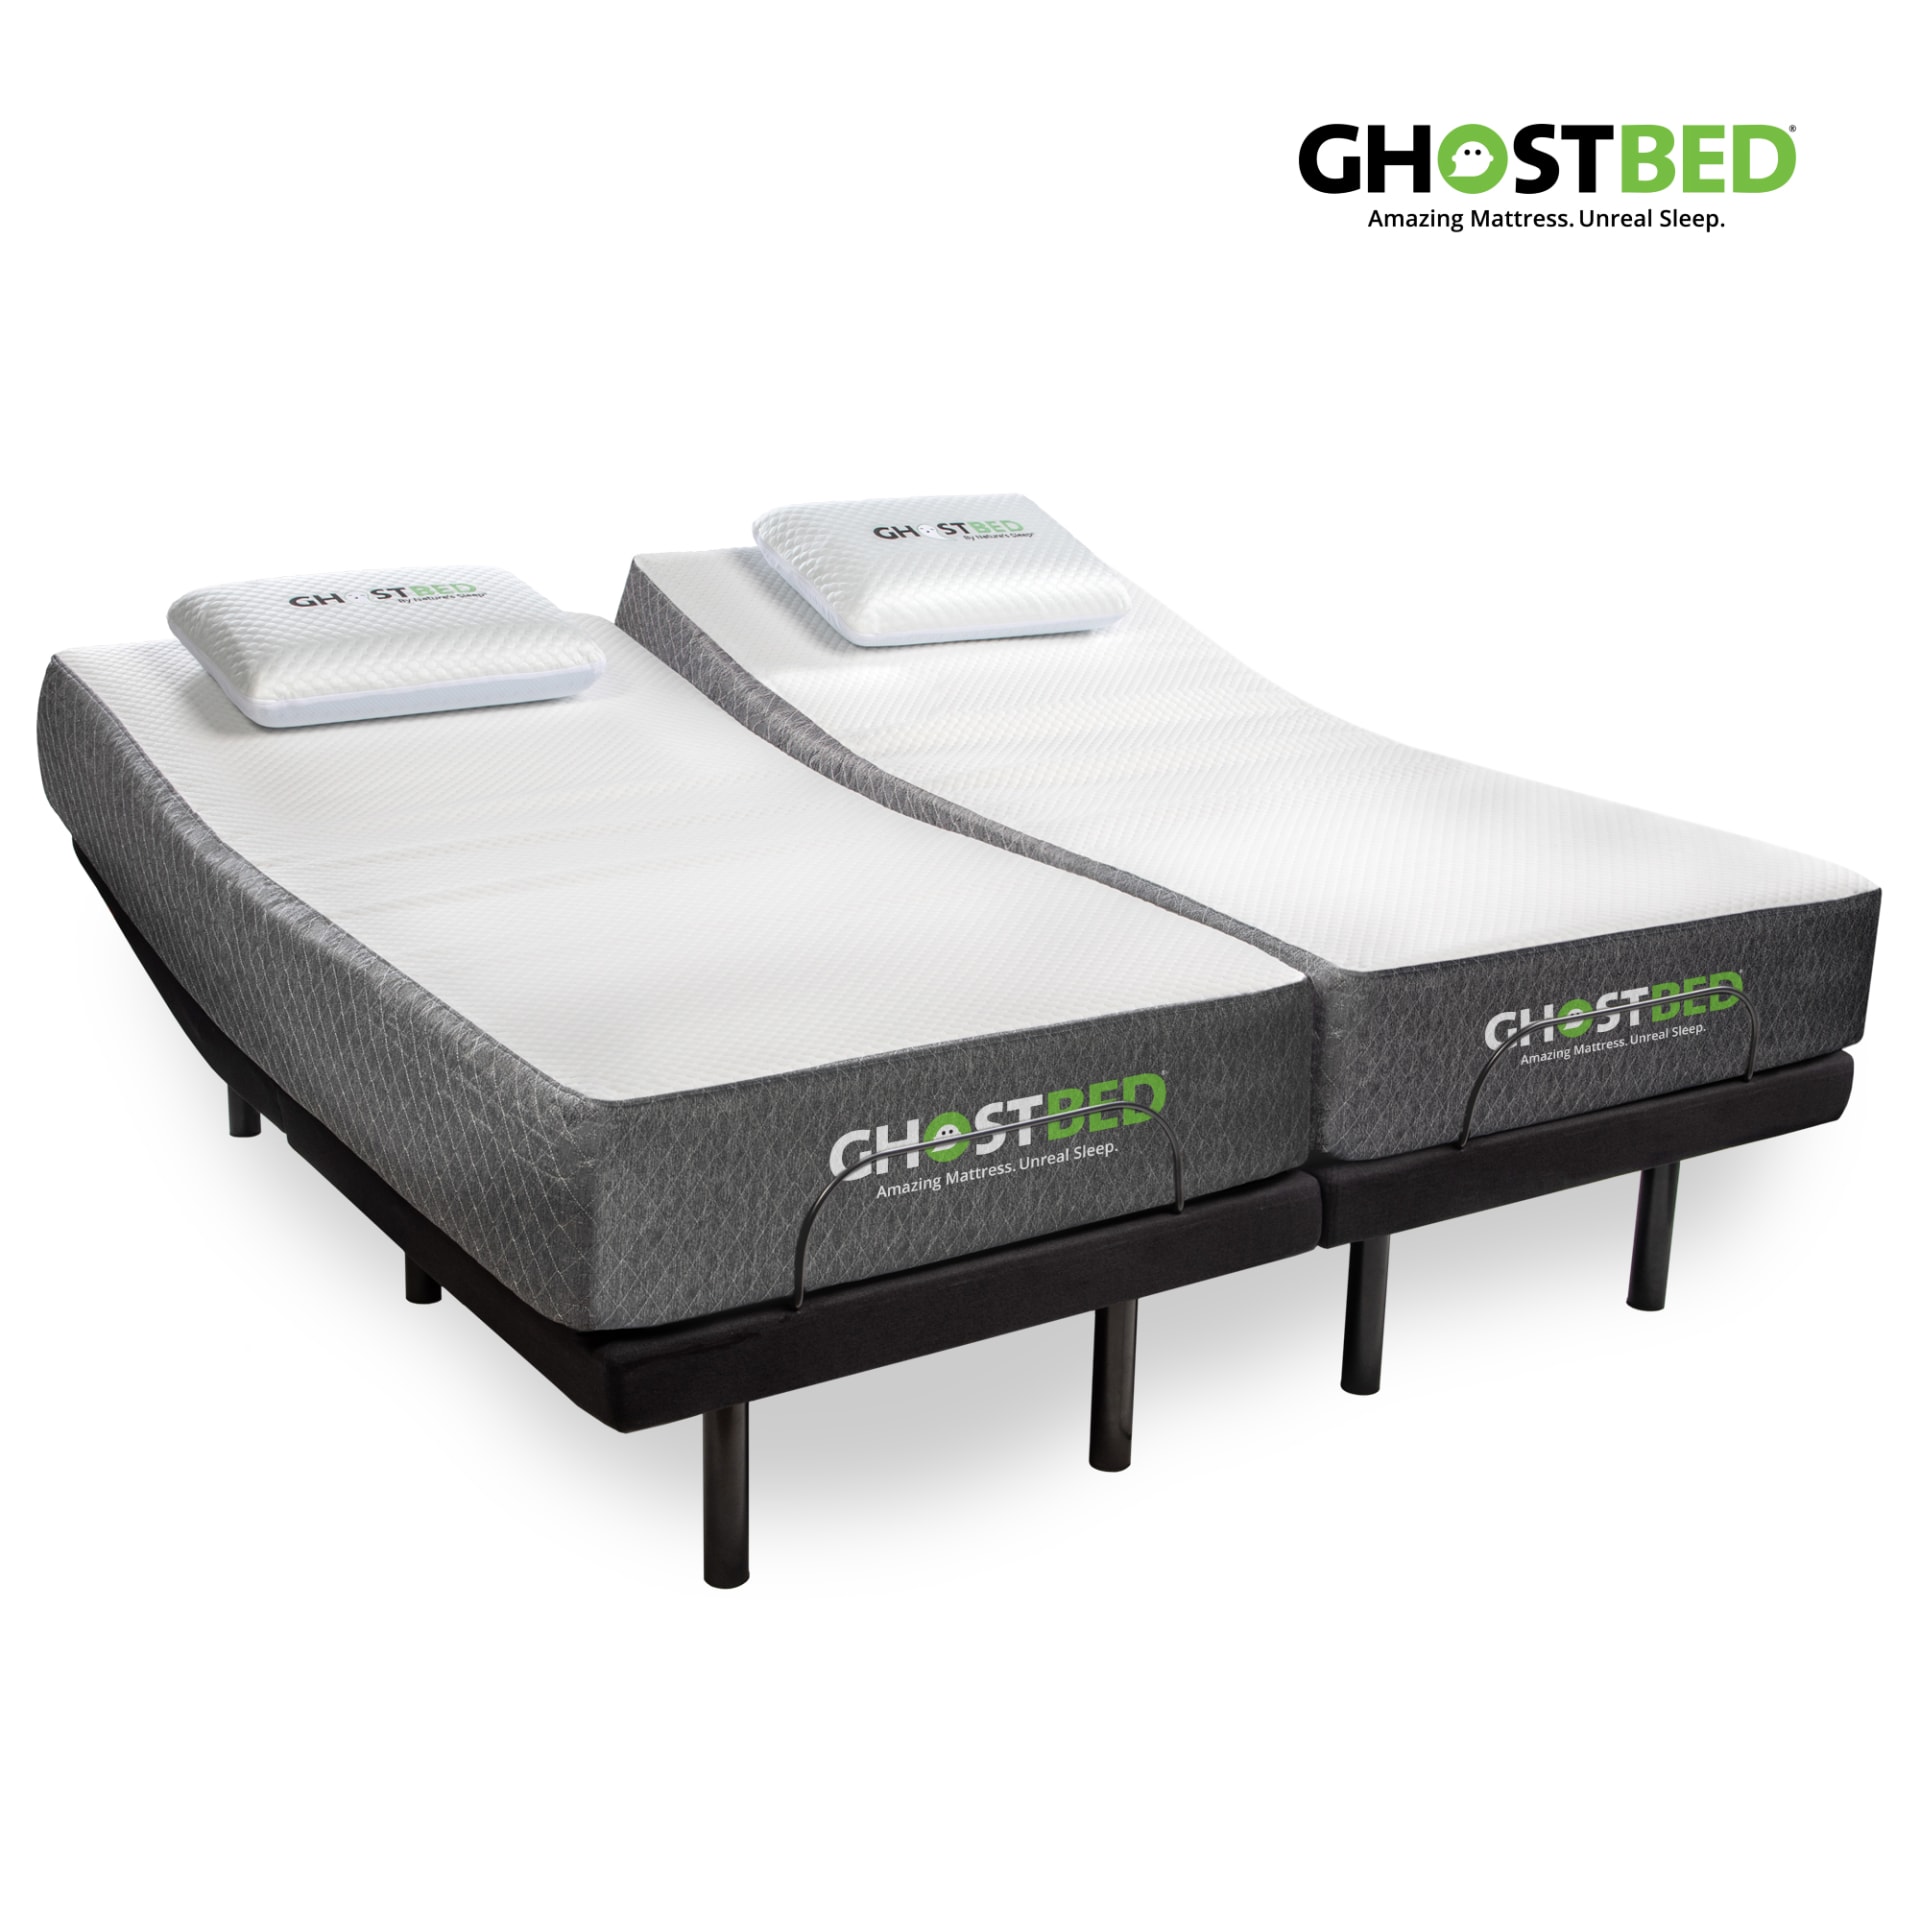 Ghostbed 11 Memory Foam Mattress With, Split King Adjustable Bed Frame With Massage